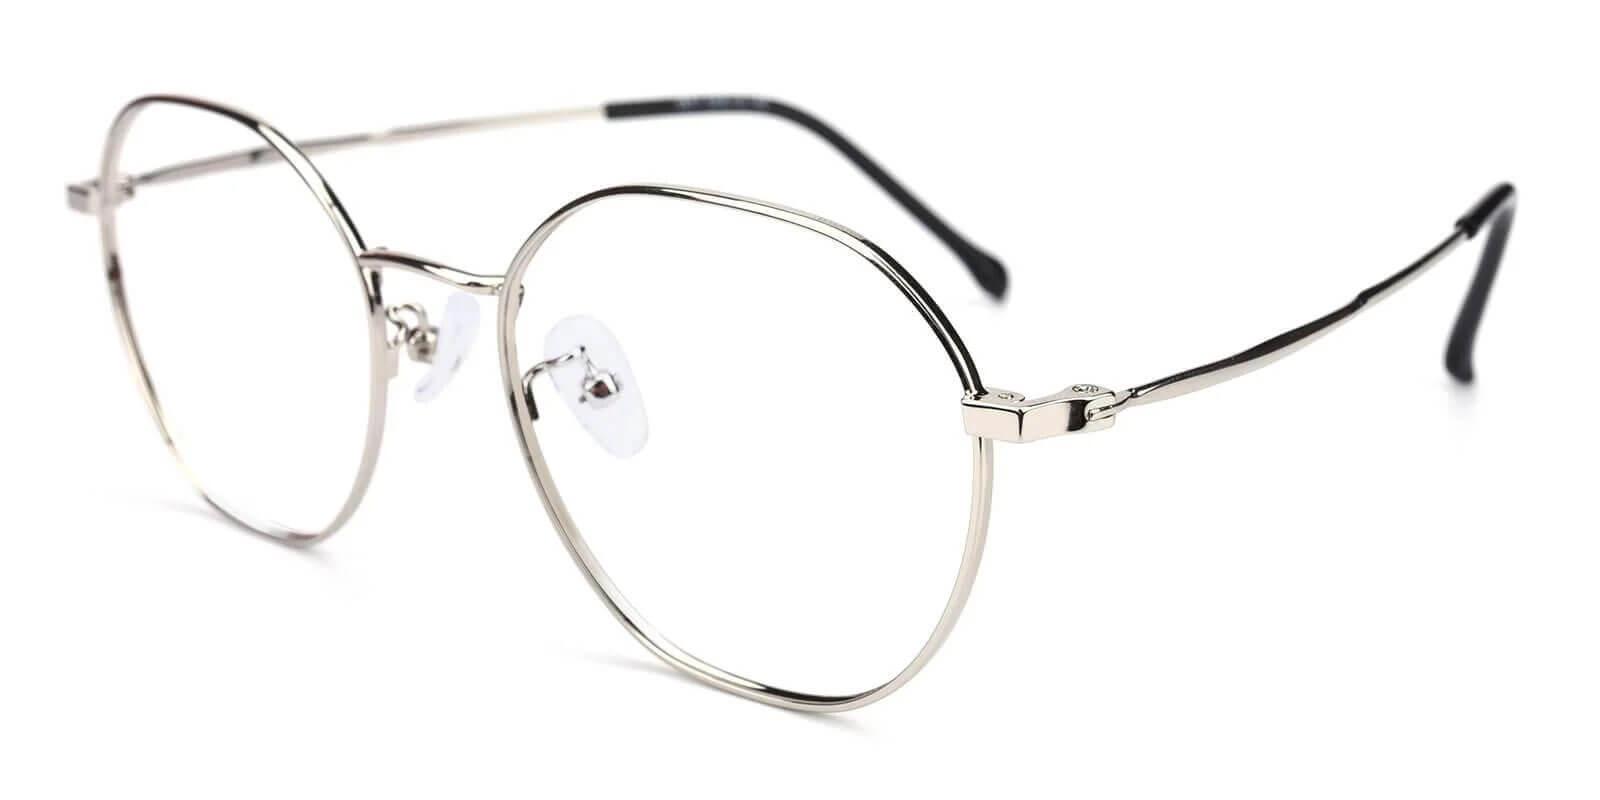 Singapore Silver Metal Eyeglasses , Lightweight , NosePads Frames from ABBE Glasses